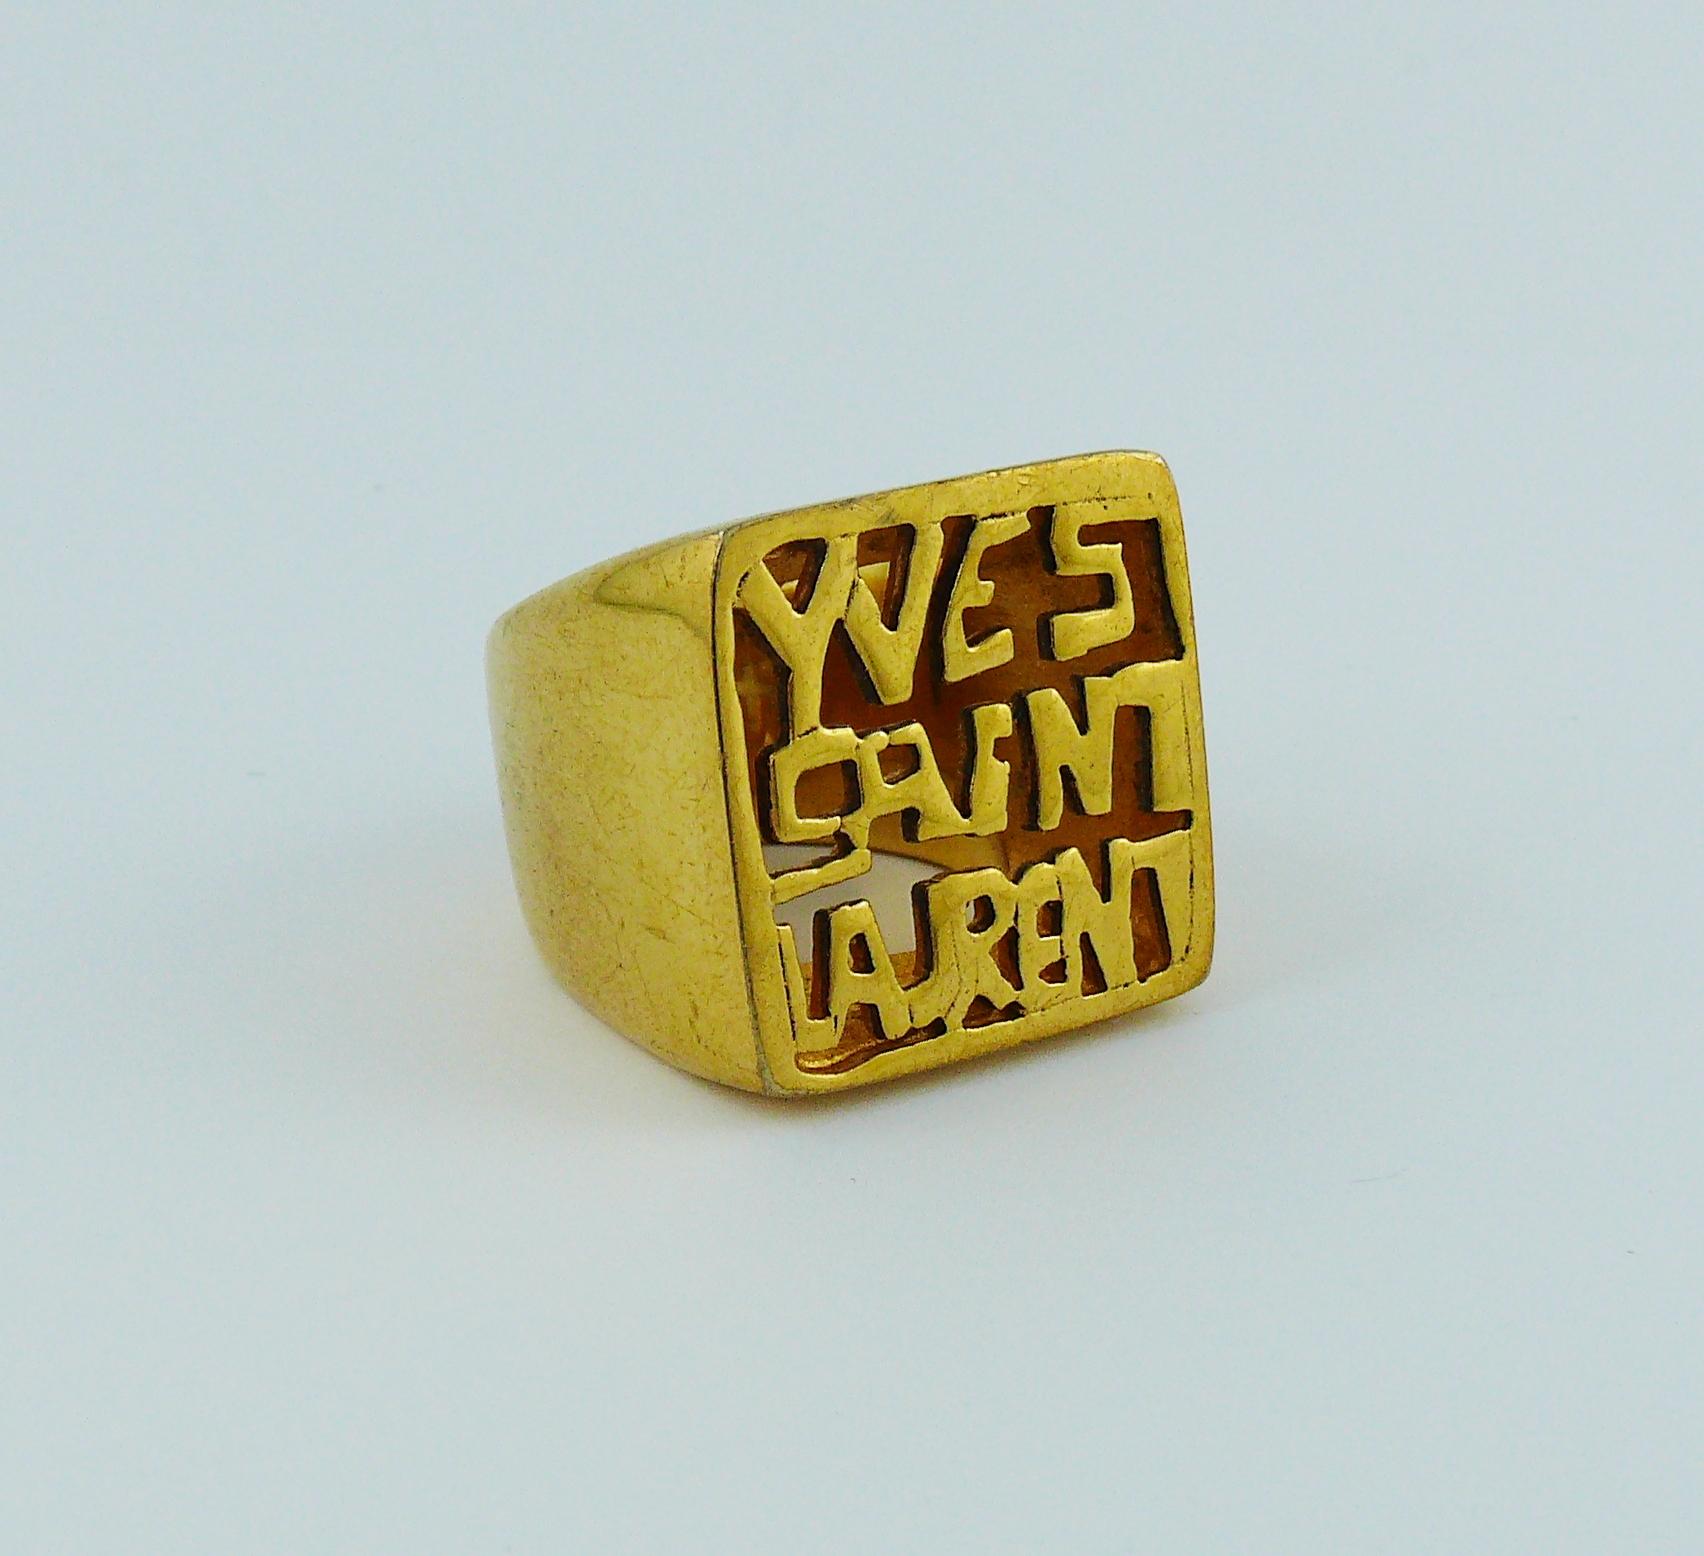 YVES SAINT LAURENT vintage gold toned signed ring featuring YVES SAINT LAURENT openwork lettering.

Unsigned.

Size embossed : 7.

Indicative measurements : top approx. 2 cm x 2 cm (0.79 inch x 0.79 inch).

JEWELRY CONDITION CHART
- New or never